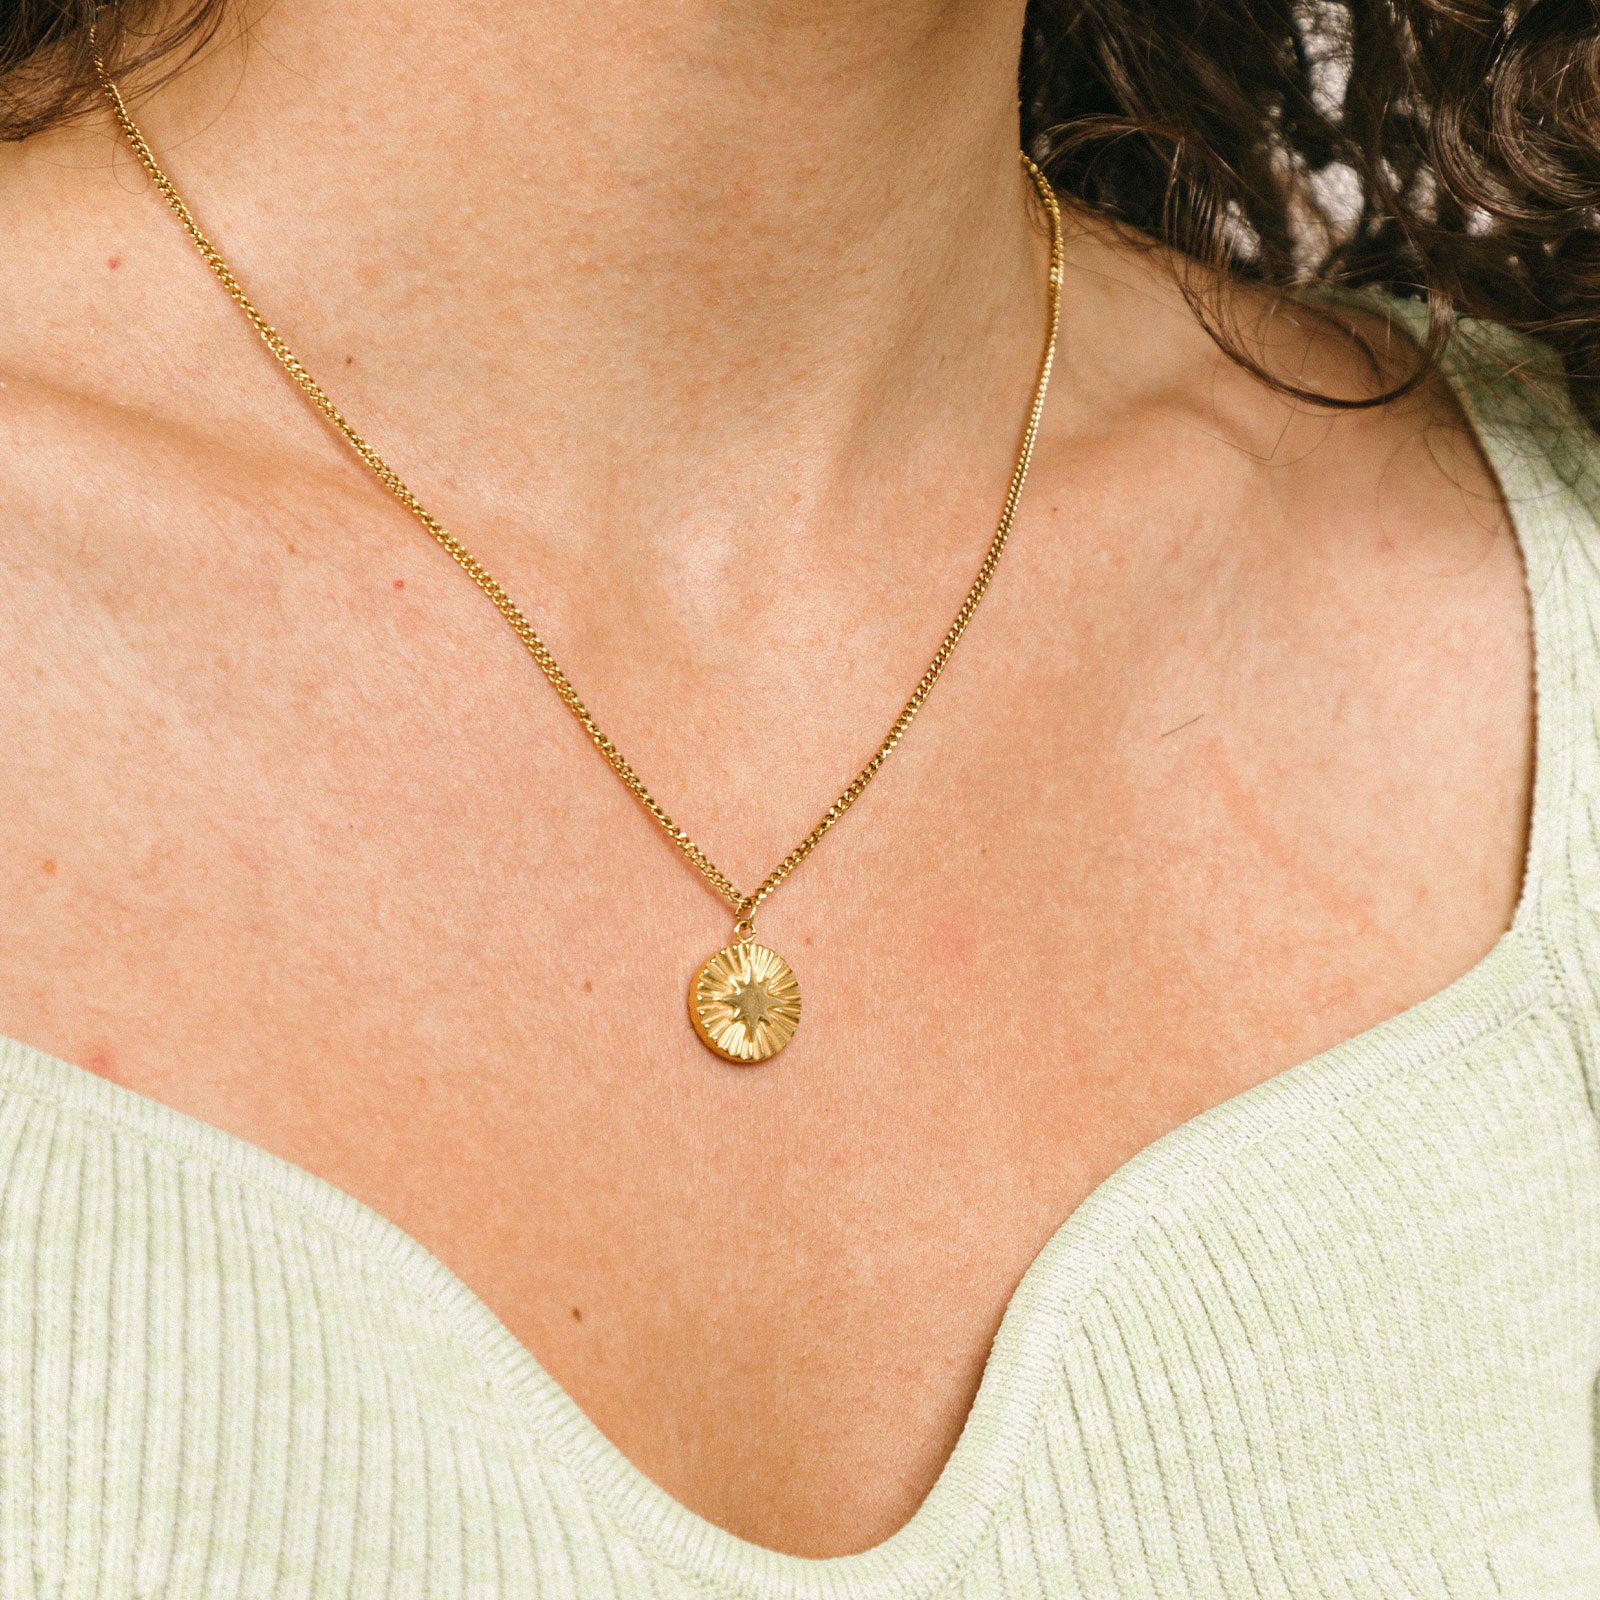 A model wearing the Starlight Pendant Necklace is adjustable, inspiring guidance and protection. This necklace is part of the Celestial Collection and pairs nicely with the Celestial Light Pendant Necklace. Constructed with 18K gold plating on 316L stainless steel, this piece is waterproof and resistant to tarnishing.